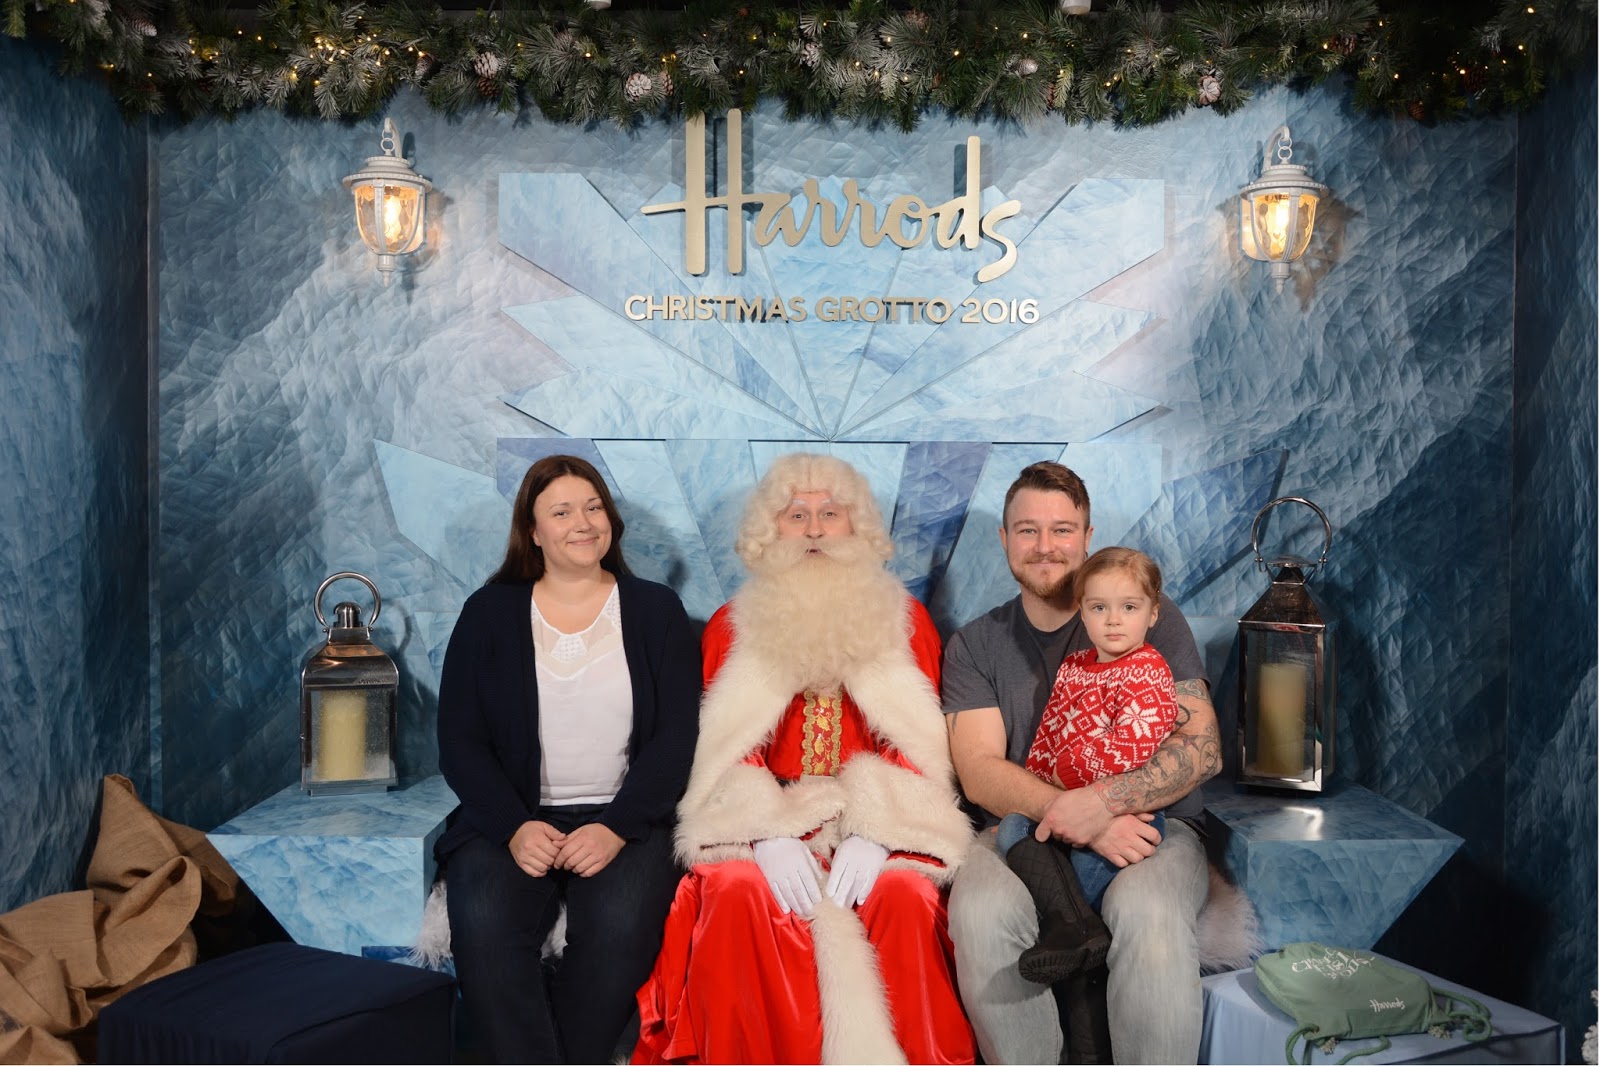 family picture with santa at harrods christmas grotto 2016 